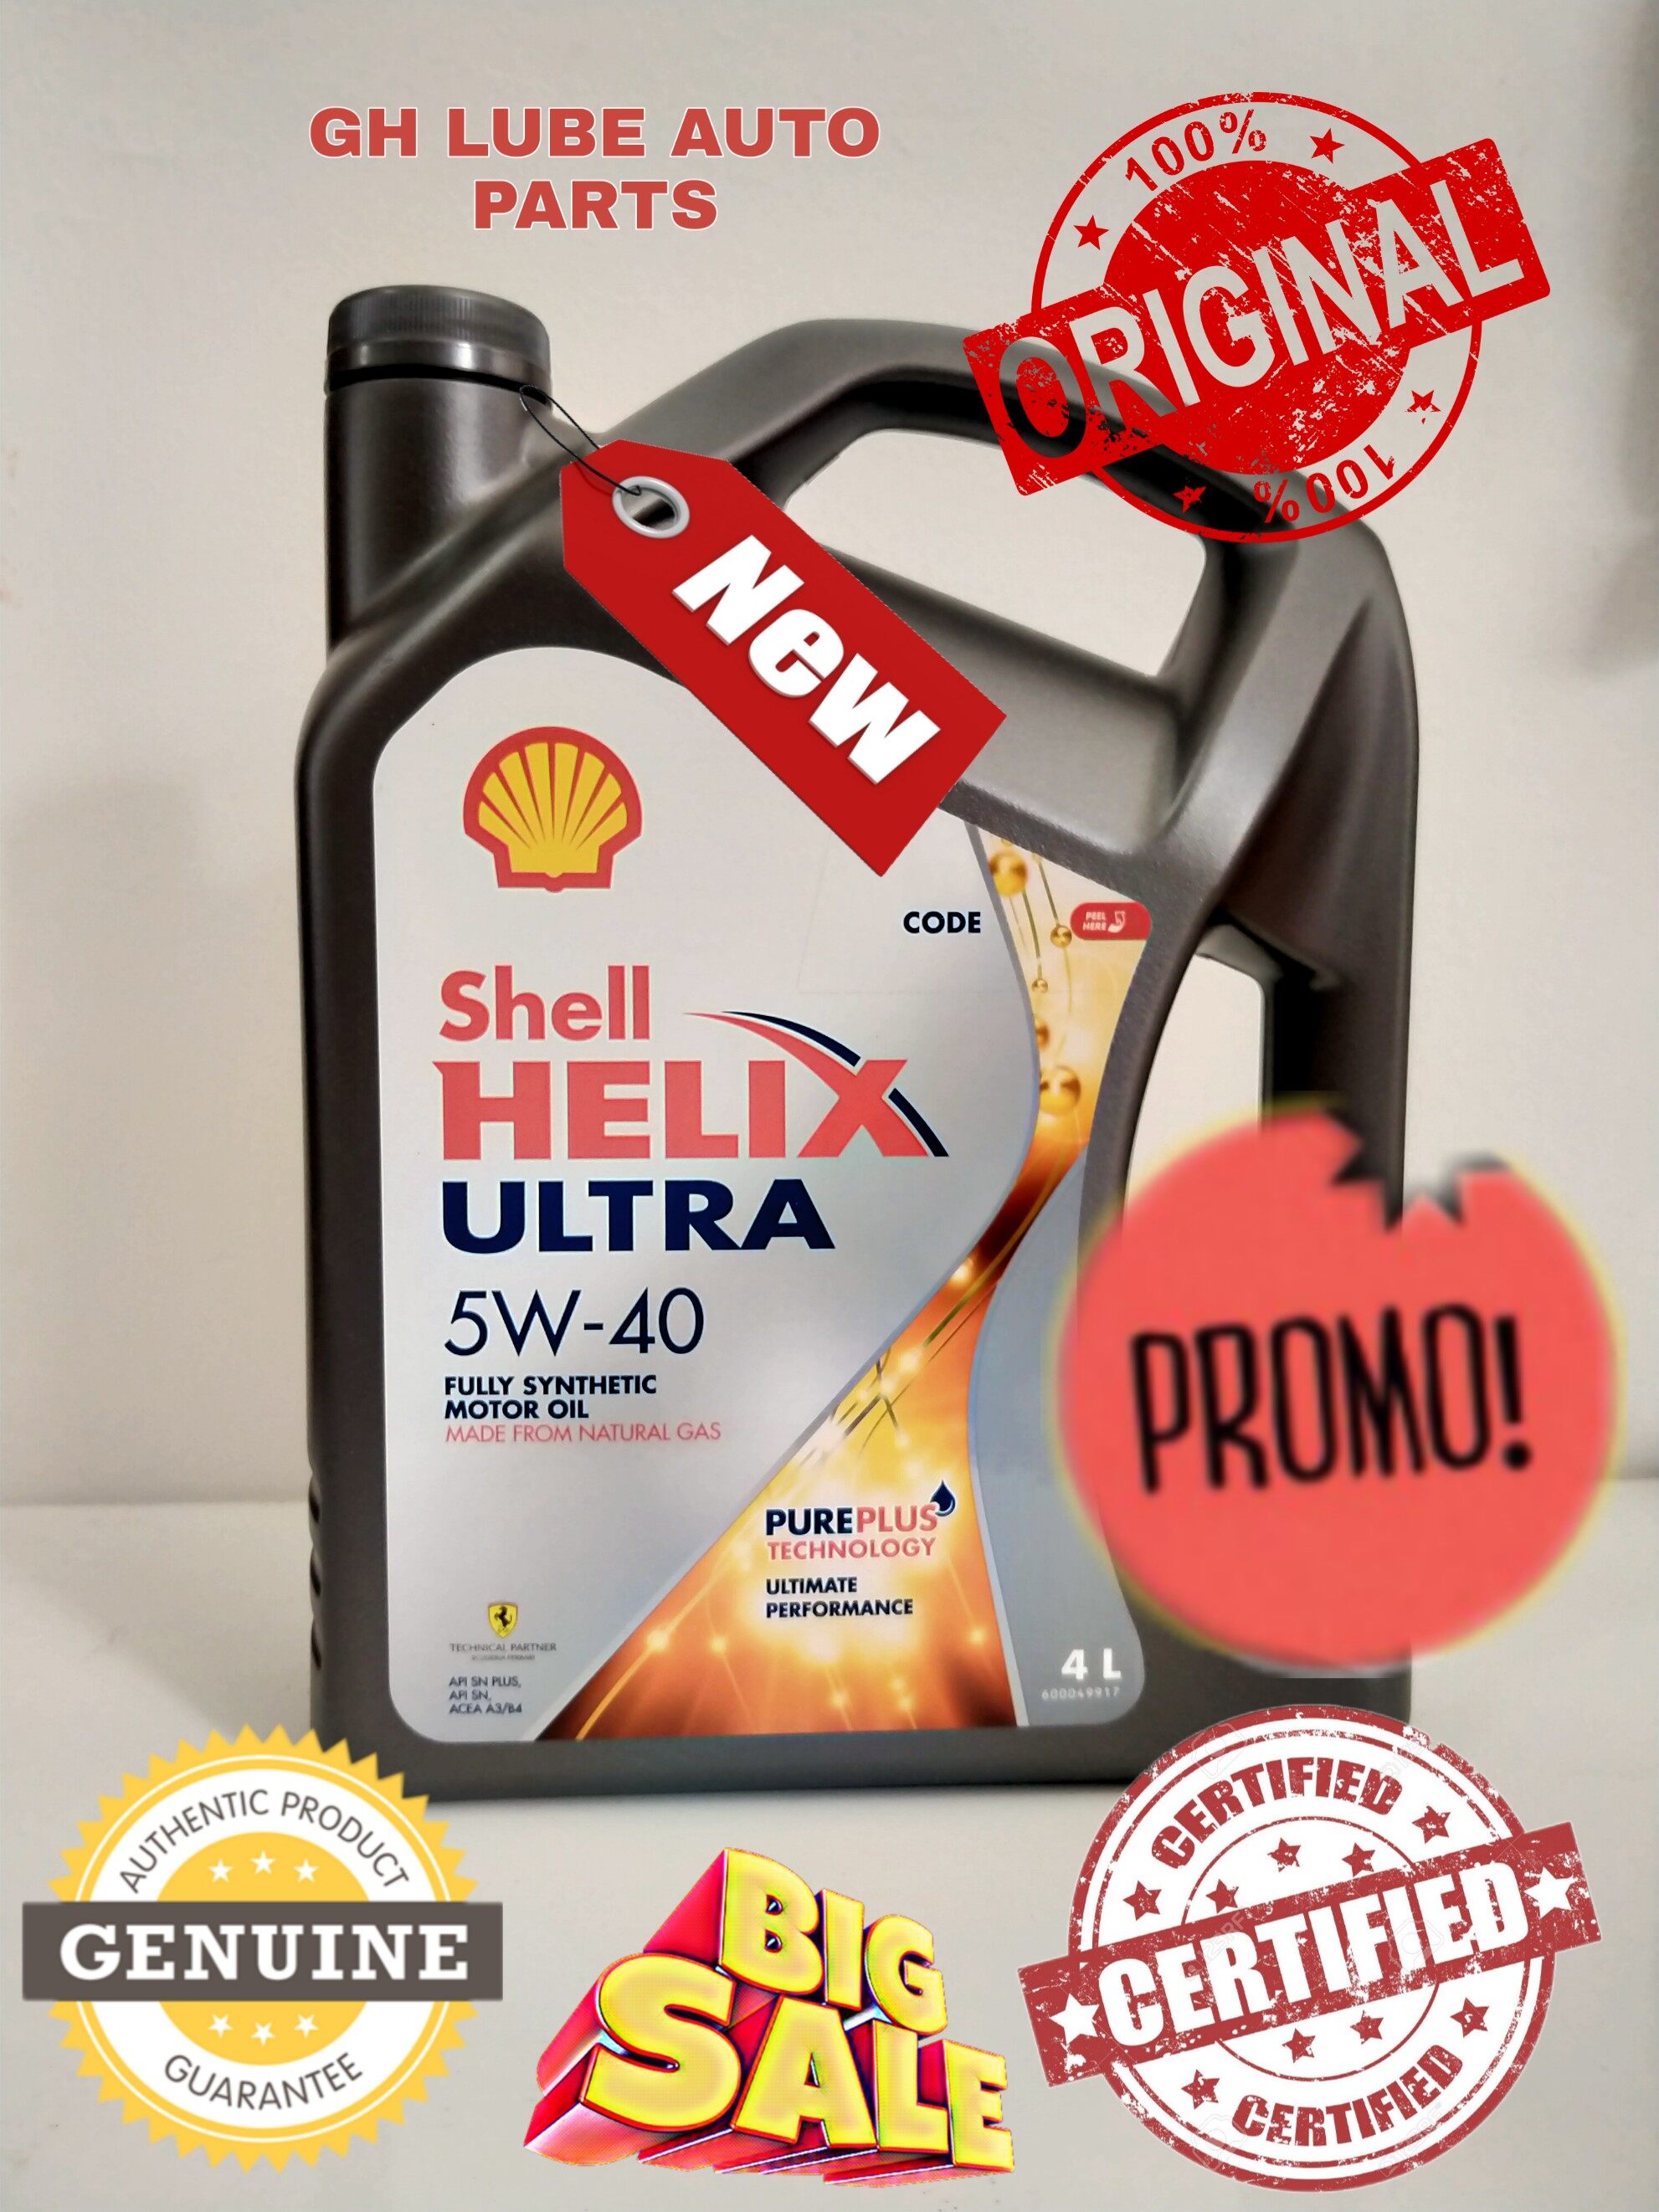 SHELL HELIX ULTRA 5W40 FULLY SYNTHETIC MOTOR OIL 4L MADE FROM NATURAL GAS